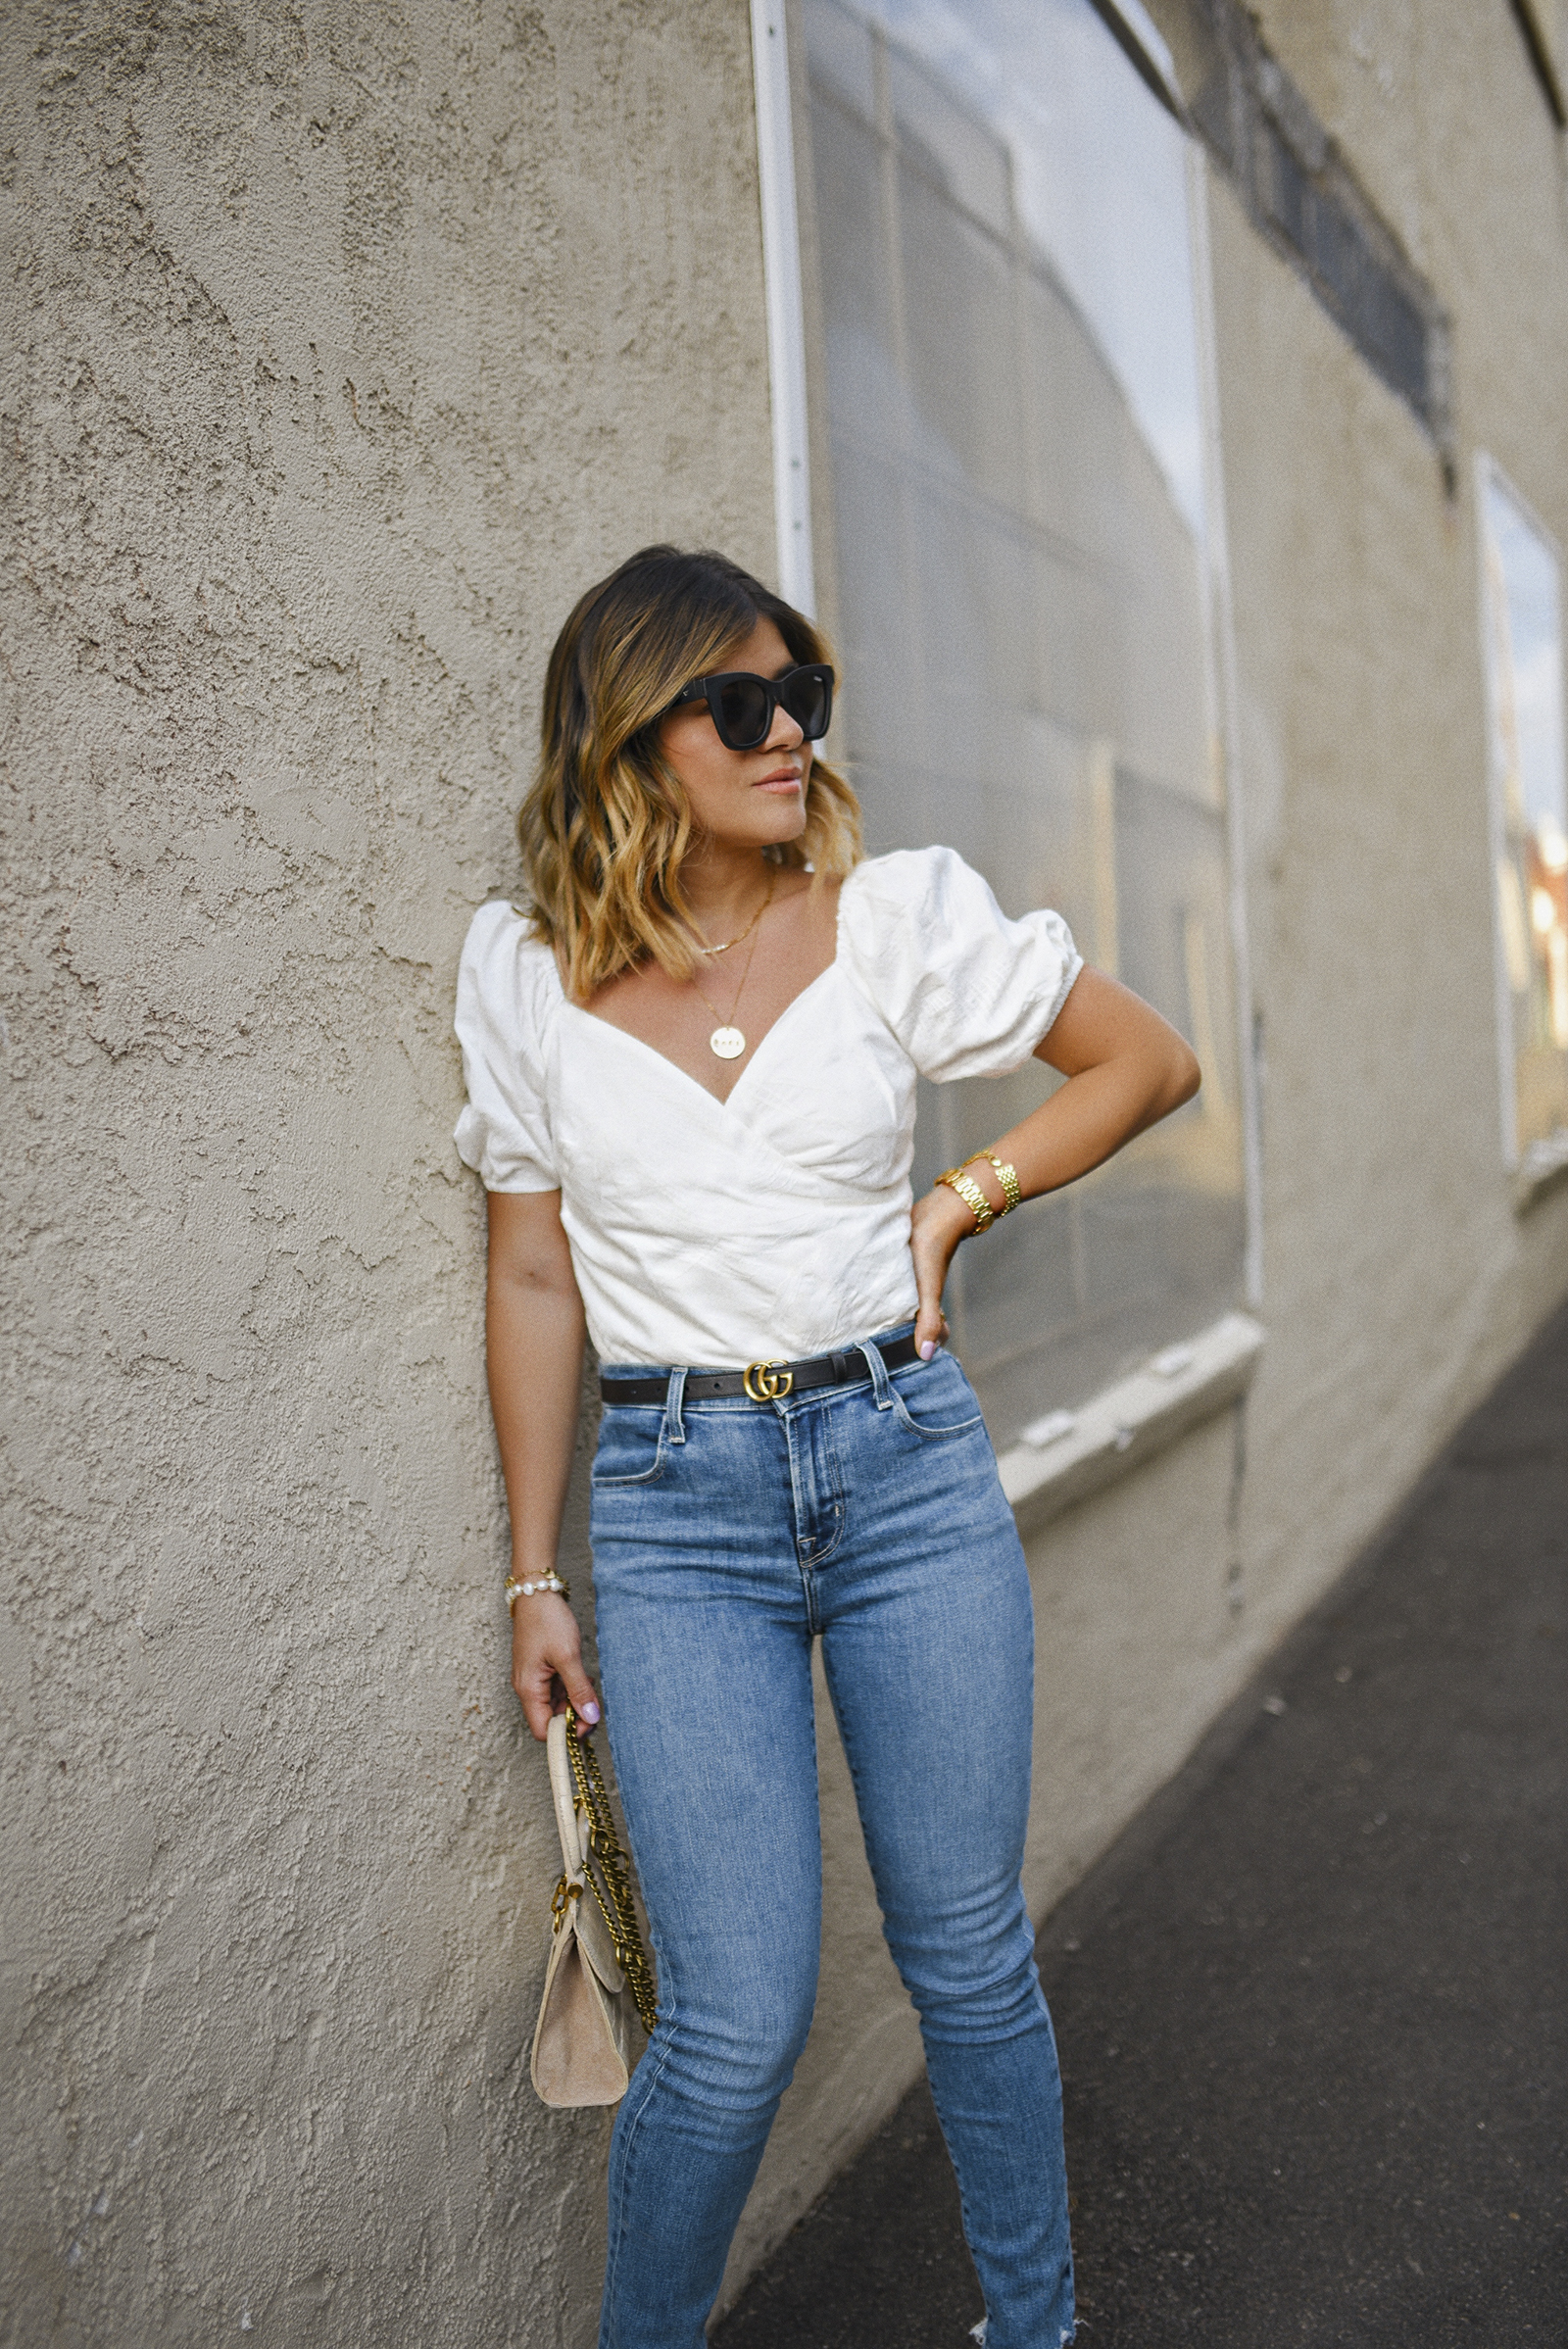 Carolina Hellal of Chic Talk wearing a Lucy Paris white top, Jbrand skinny jeans, Quay sunglasses and Gucci belt 